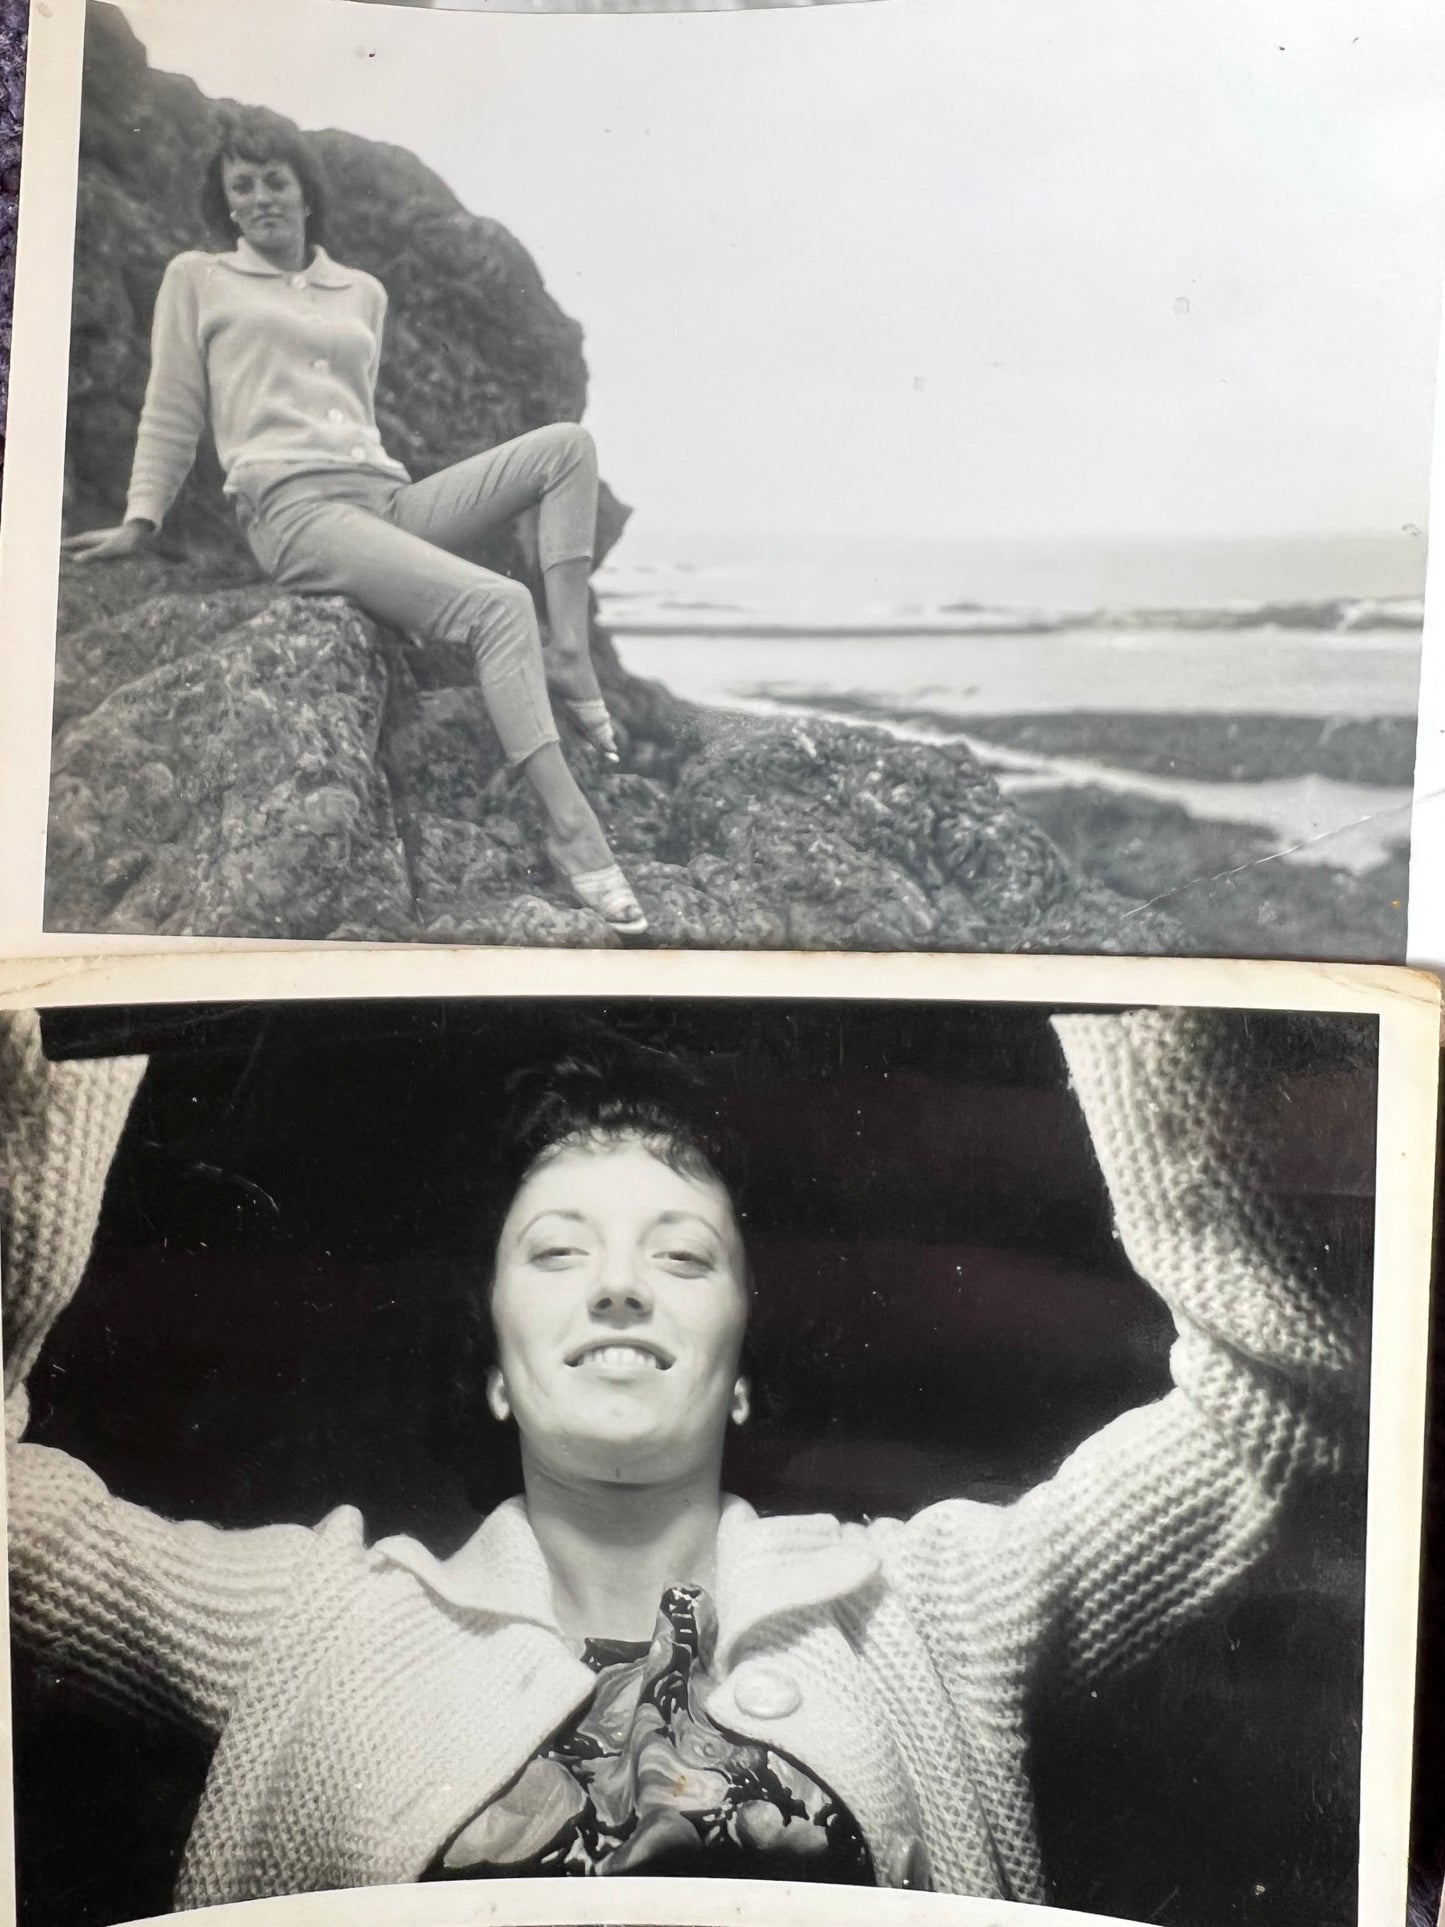 16 Old Photos of the Same Woman from the 40s to the 60s (C40)